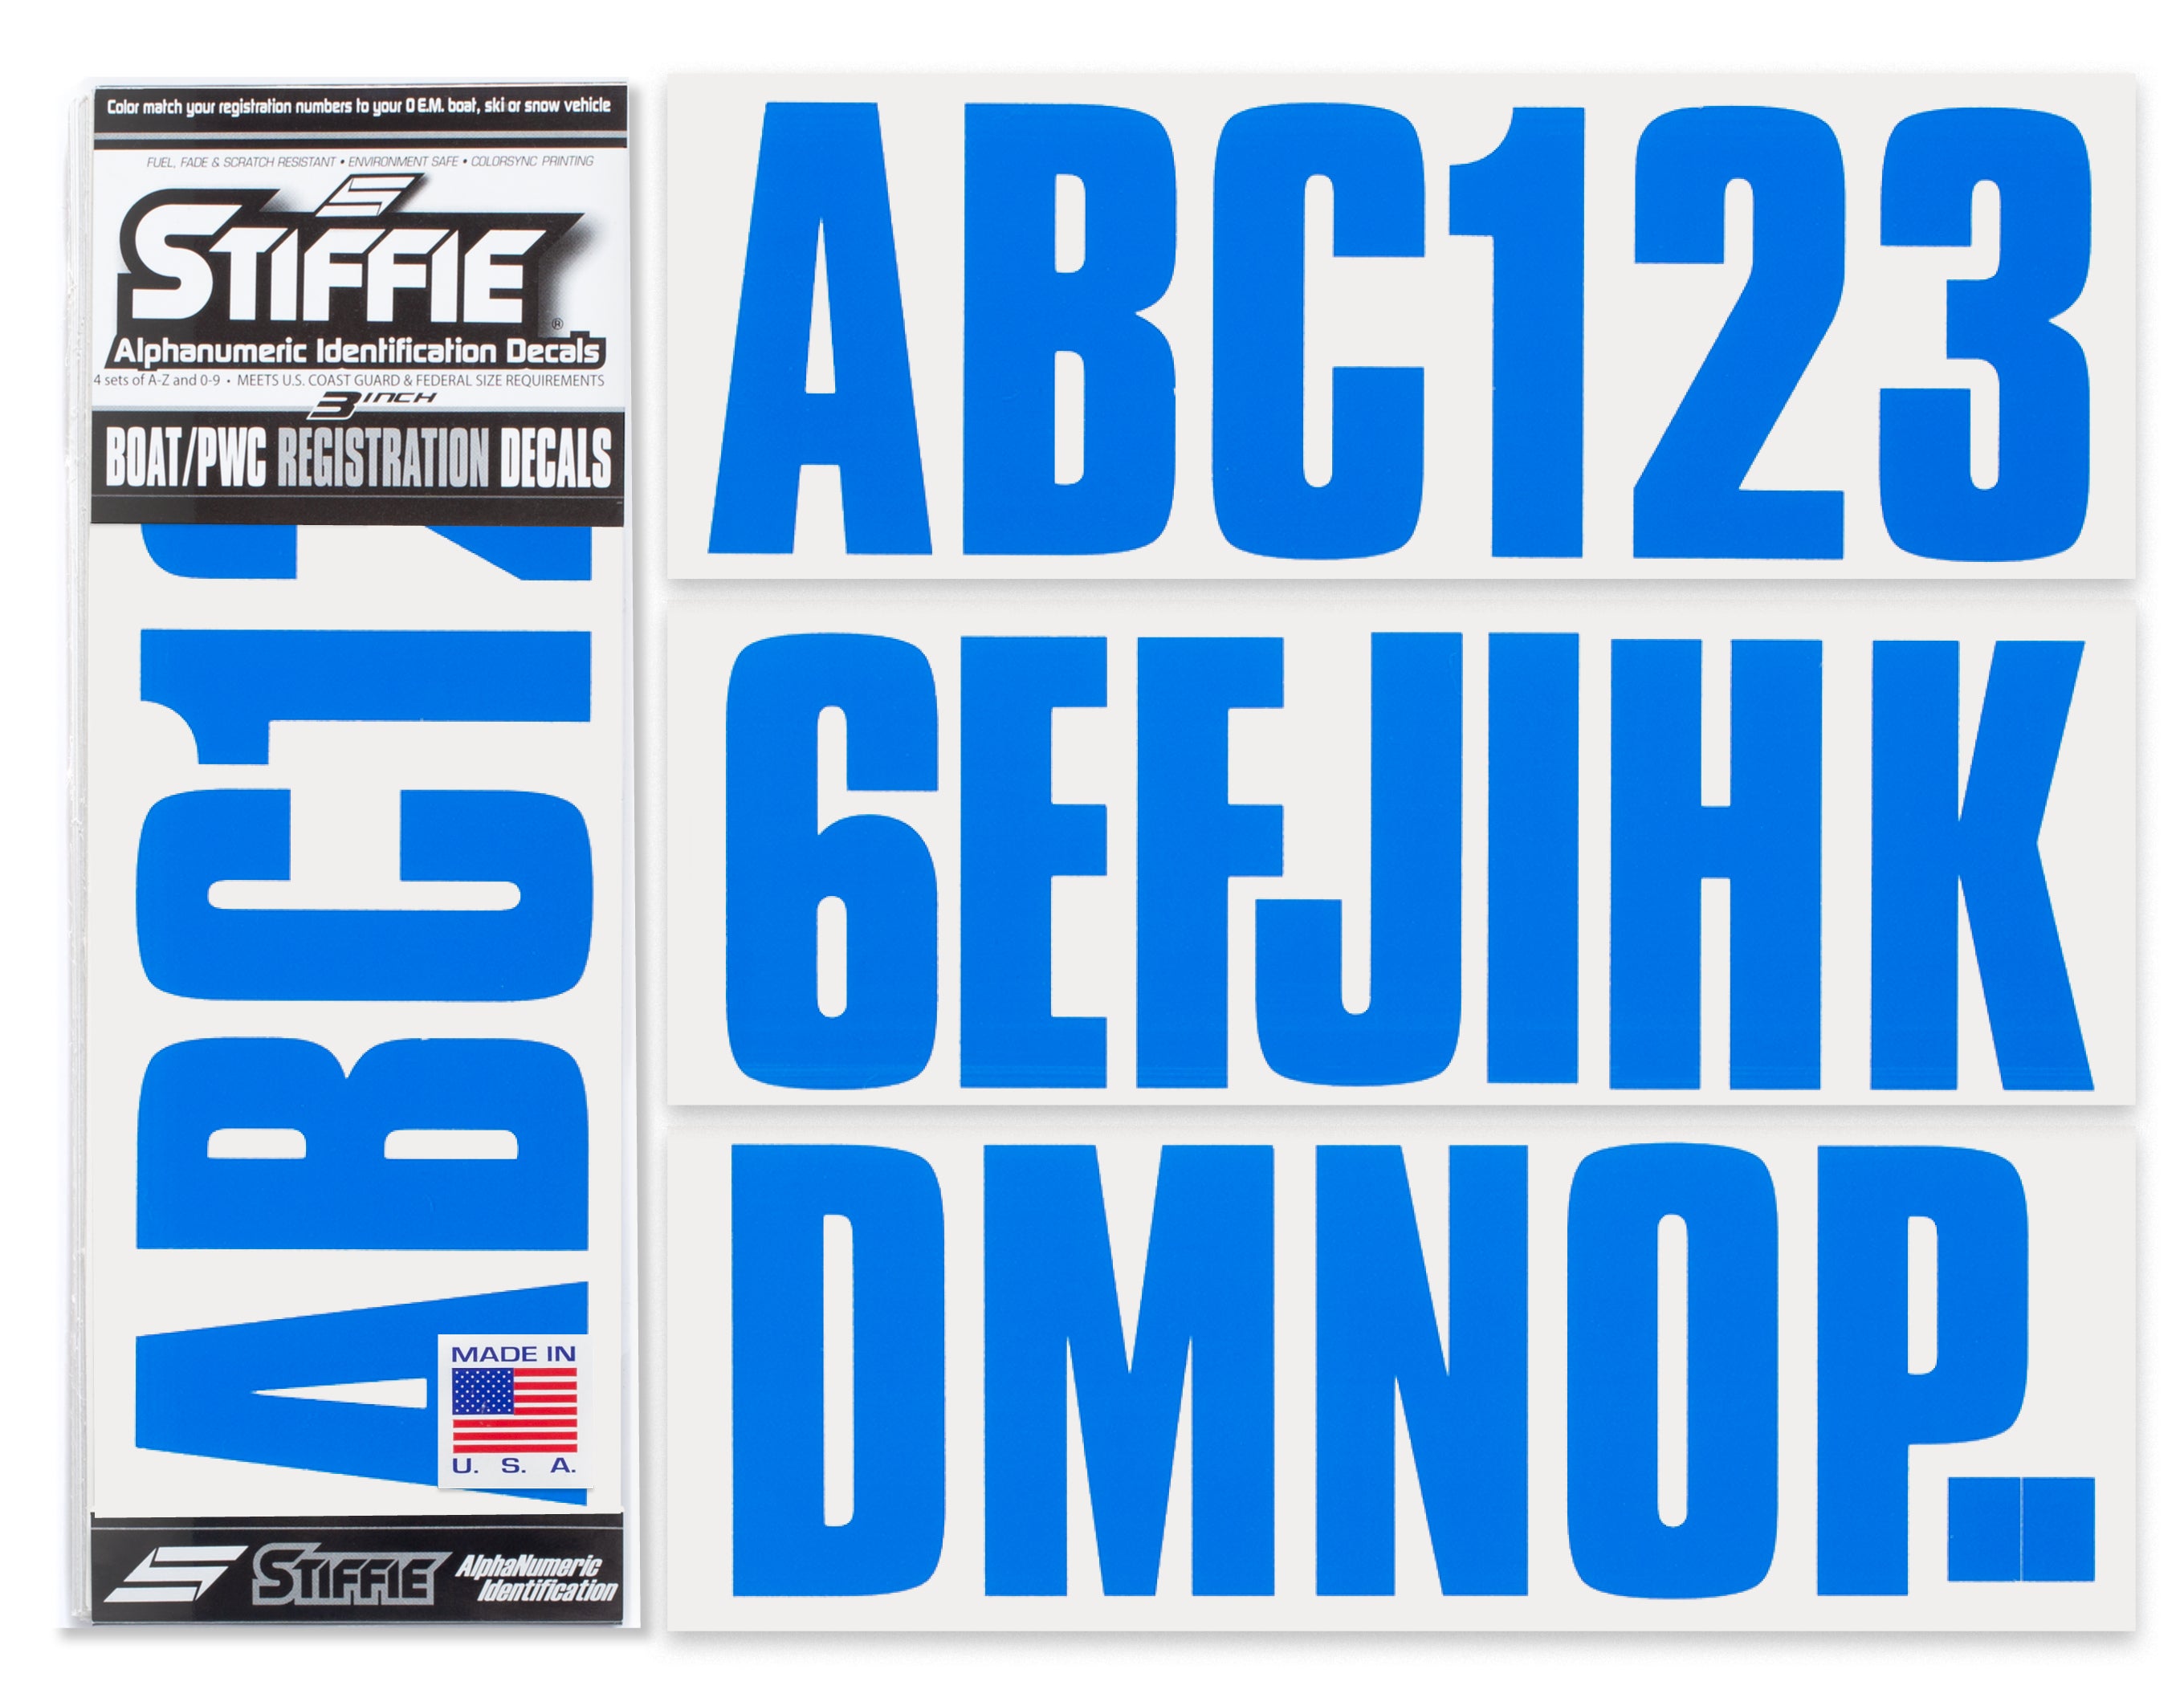 STIFFIE Uniline Octane Blue 3" ID Kit Alpha-Numeric Registration Identification Numbers Stickers Decals for Boats & Personal Watercraft